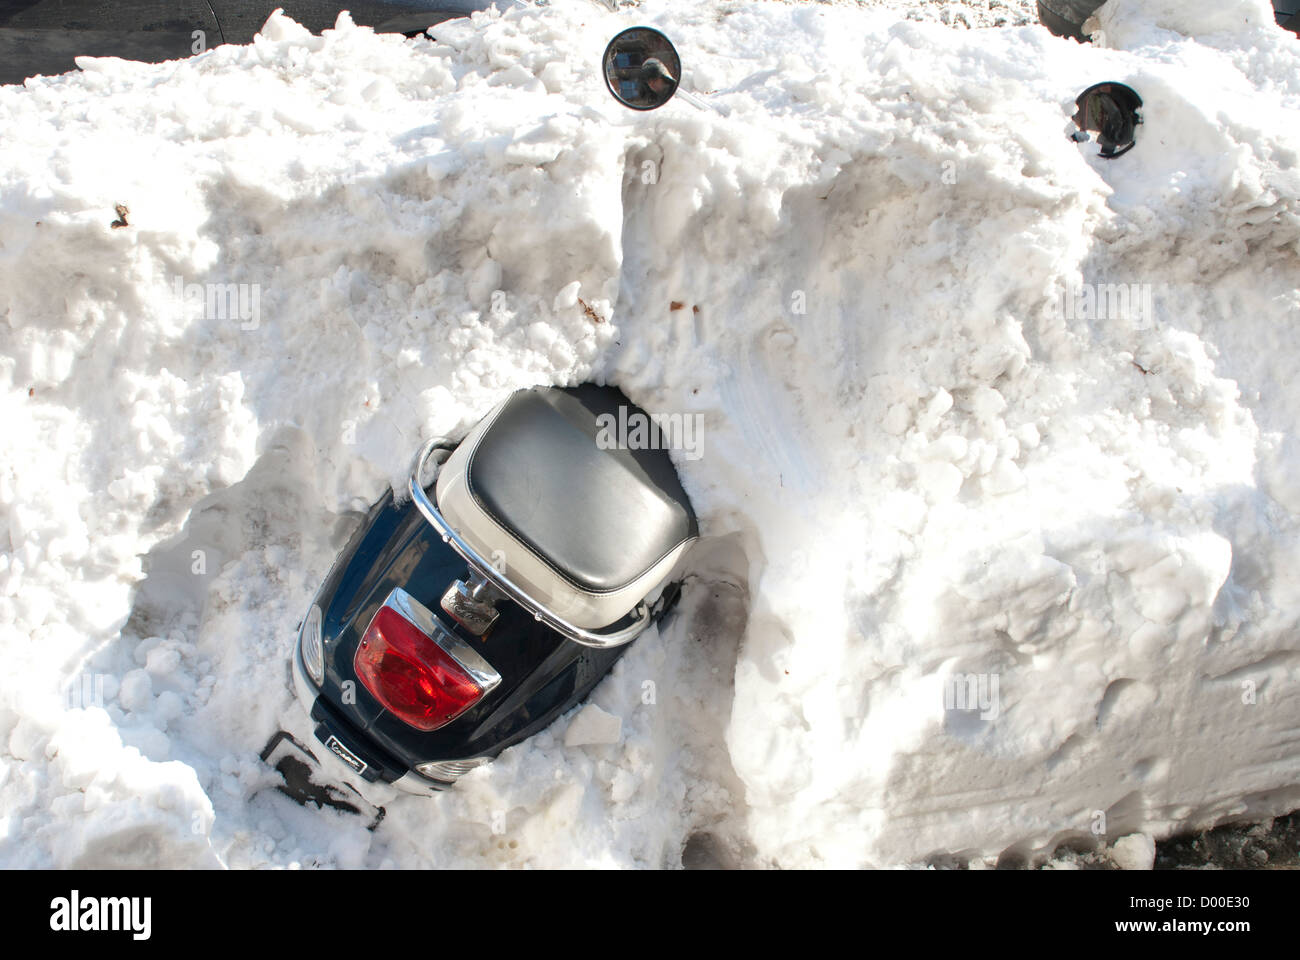 Moped buried in snow on the side of the road Stock Photo